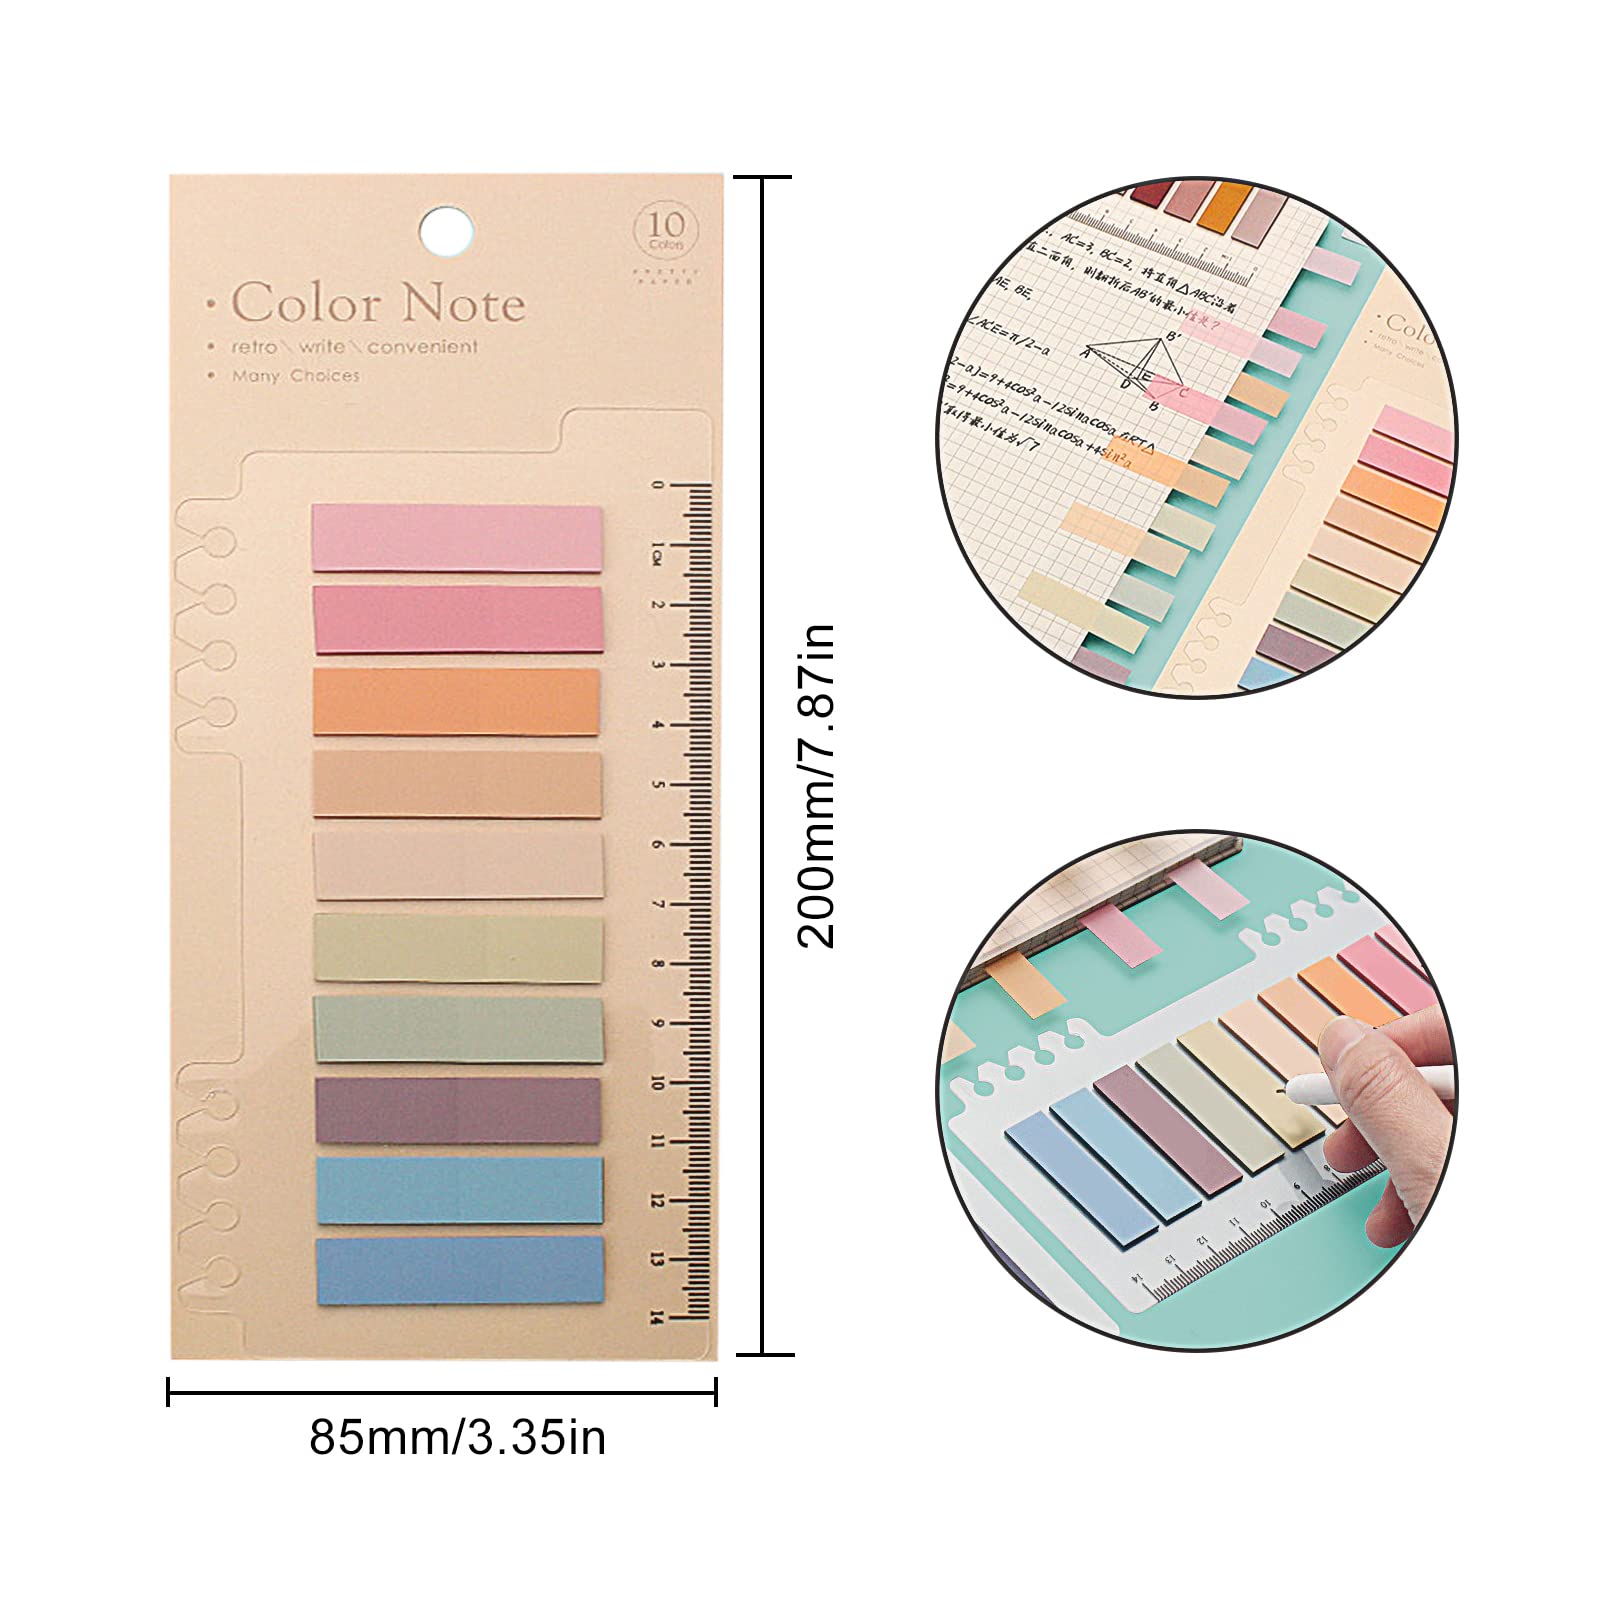 800PCS Sticky Tabs, Transparent Sticky Notes Flags Pastel Book Tabs Annotation Tabs Morandi Page Markers Clear Index Tabs with Ruler Translucent Index Stickers for Books Page Bookmarks Office Supplies